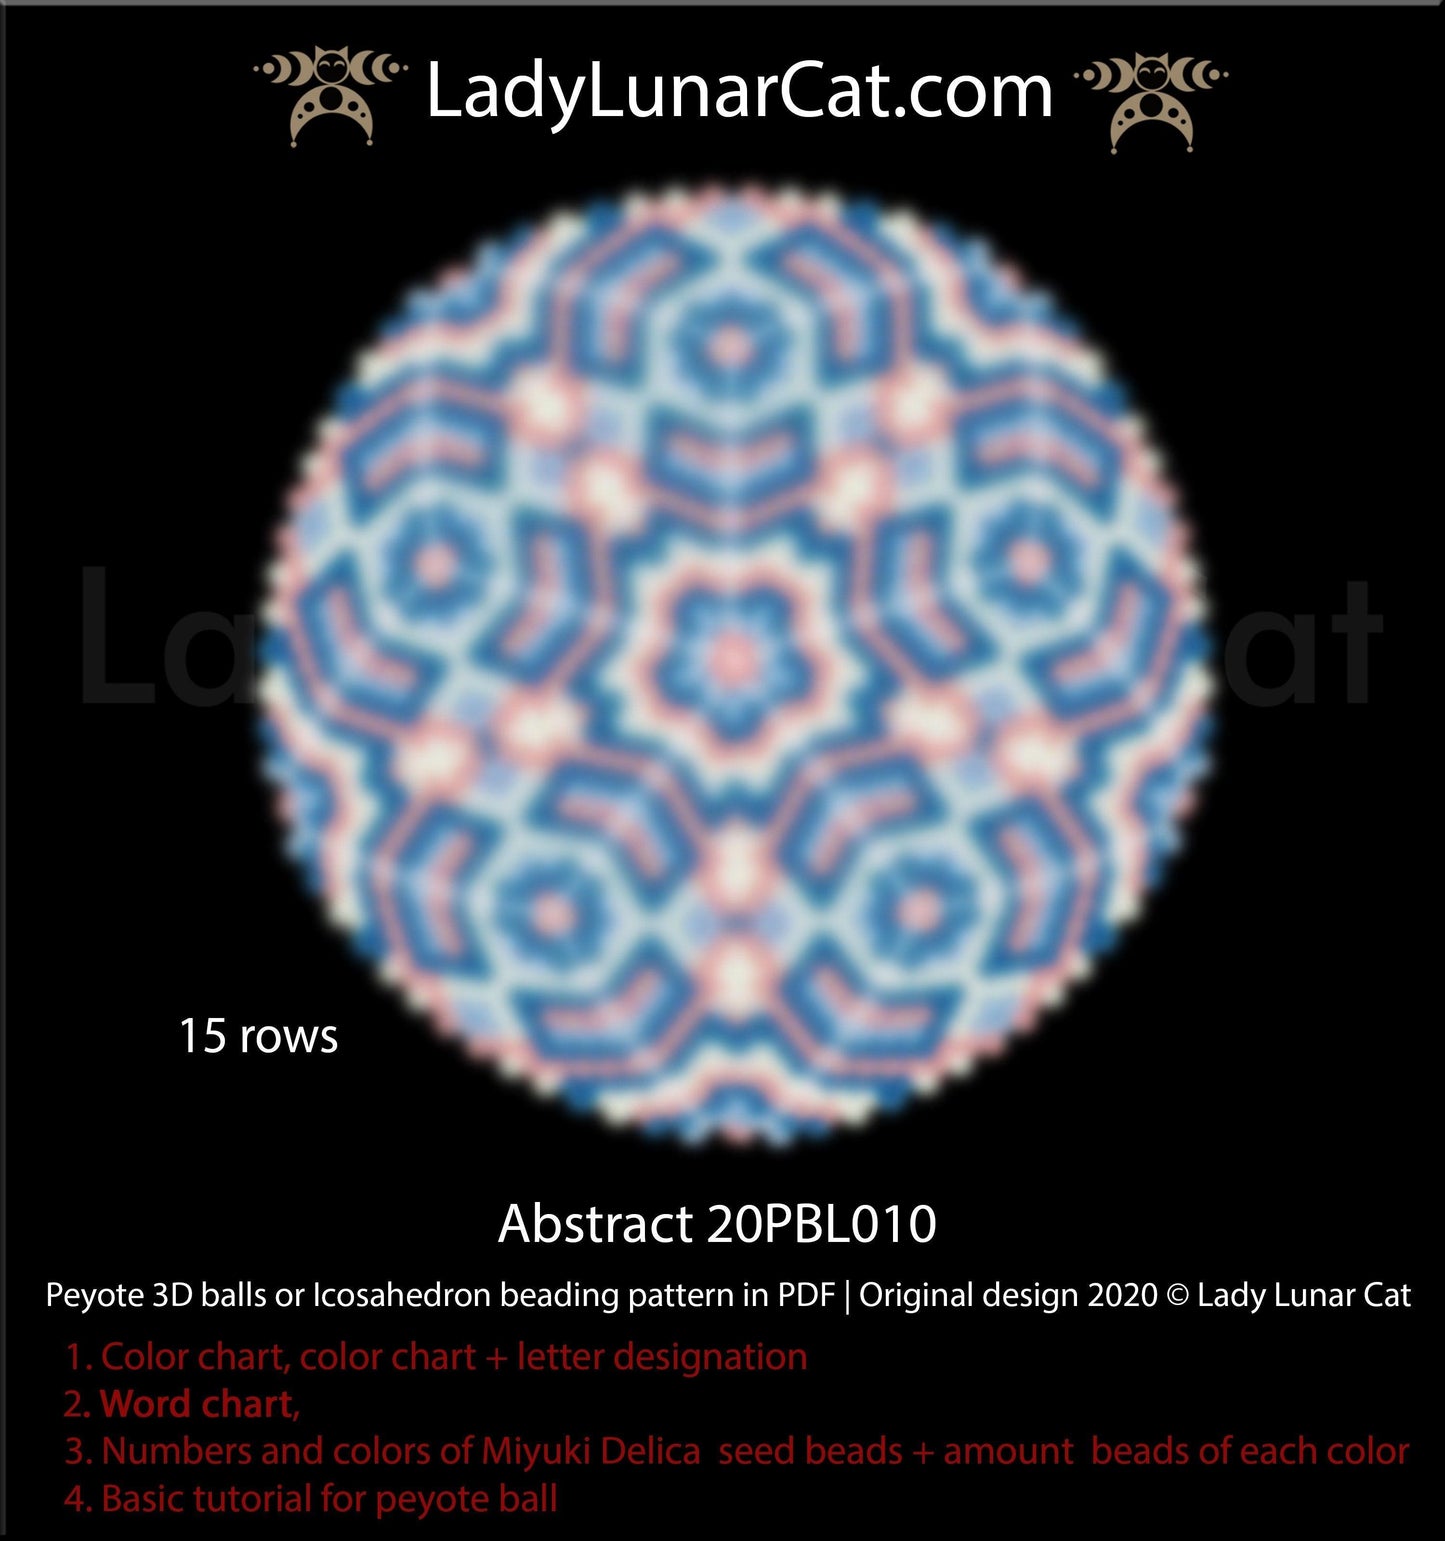 Peyote 3d ball pattern for beading | Beaded Icosahedron Abstract 20PBL010 15 rows LadyLunarCat